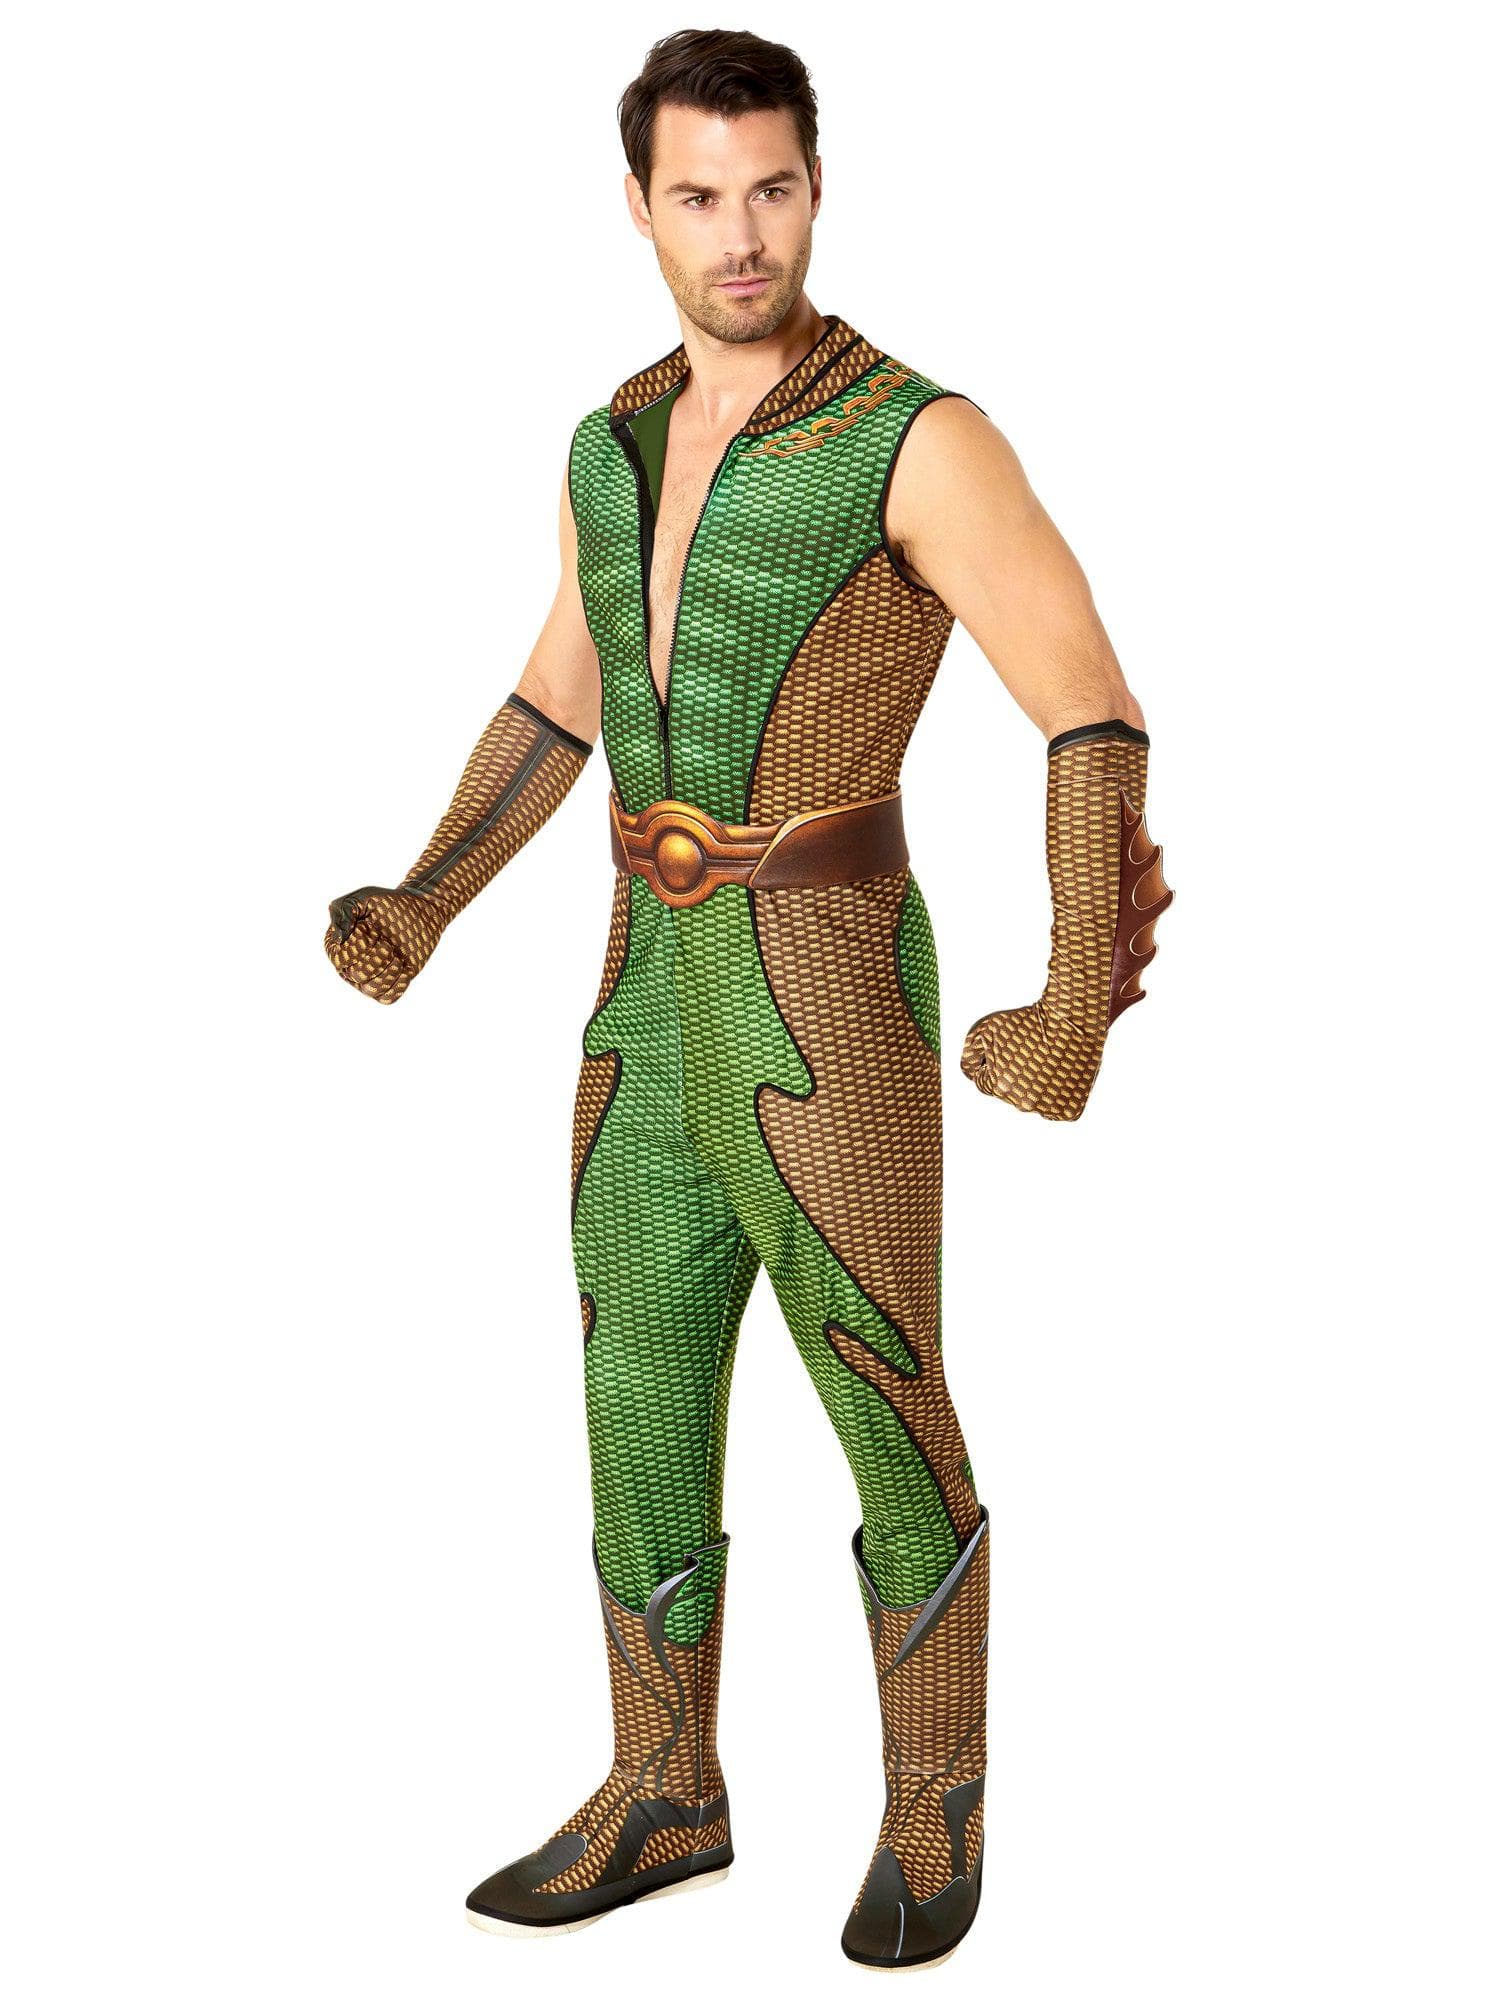 The Boys Deluxe The Deep Adult Costume - costumes.com